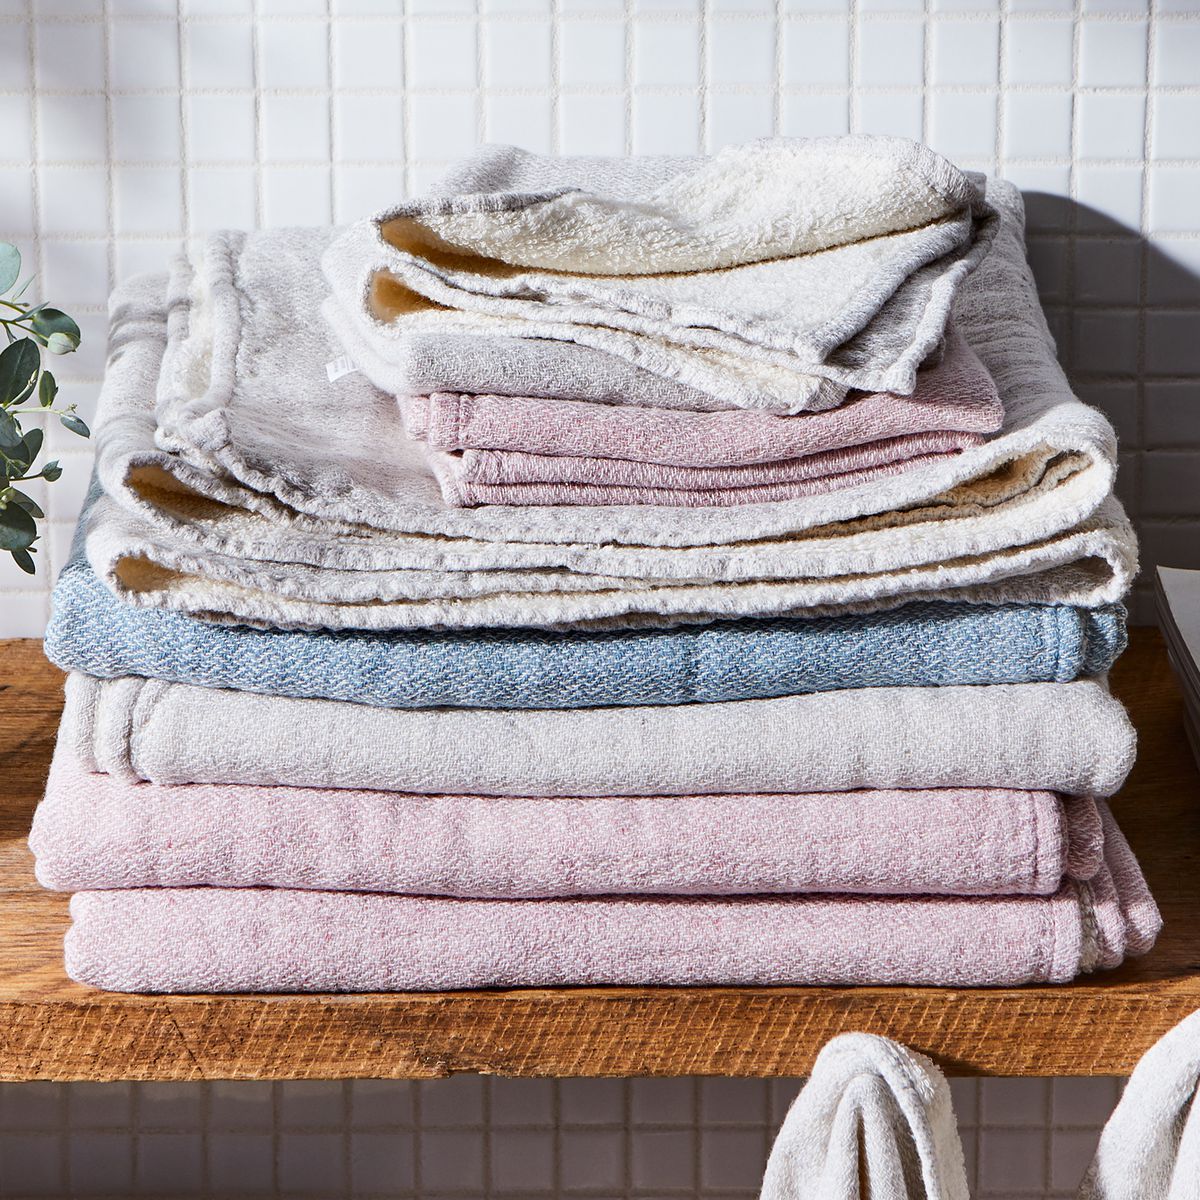 5 Best Bath Towels 2021 - Quality Bathroom Towels for Every Budget